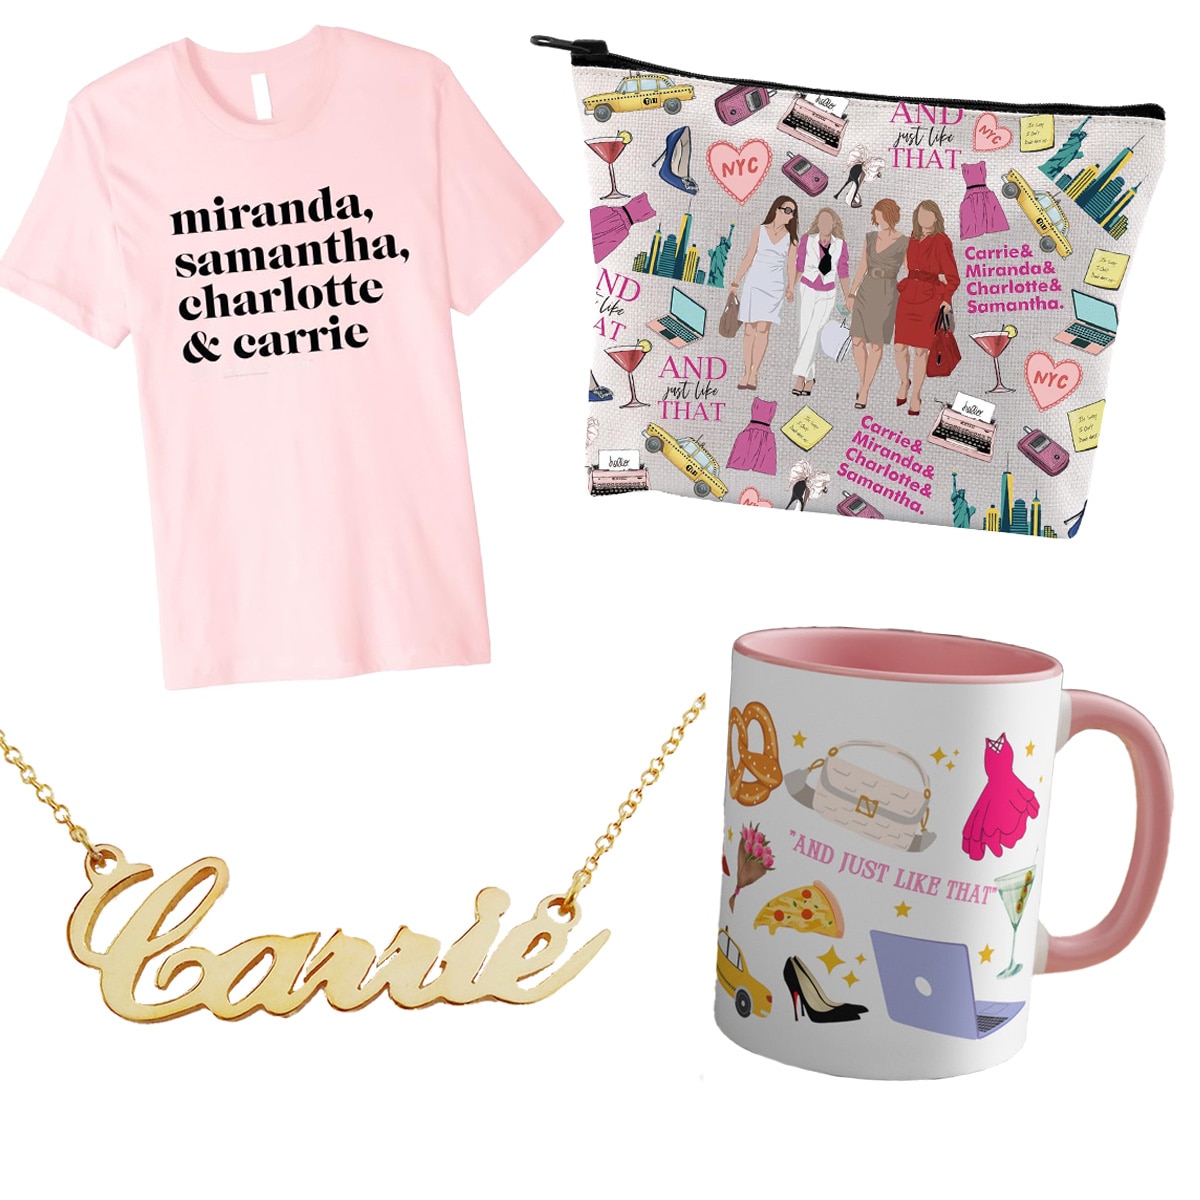 Cheers Your Cosmos to Our Fabulous Sex and the City Gift Guide image pic